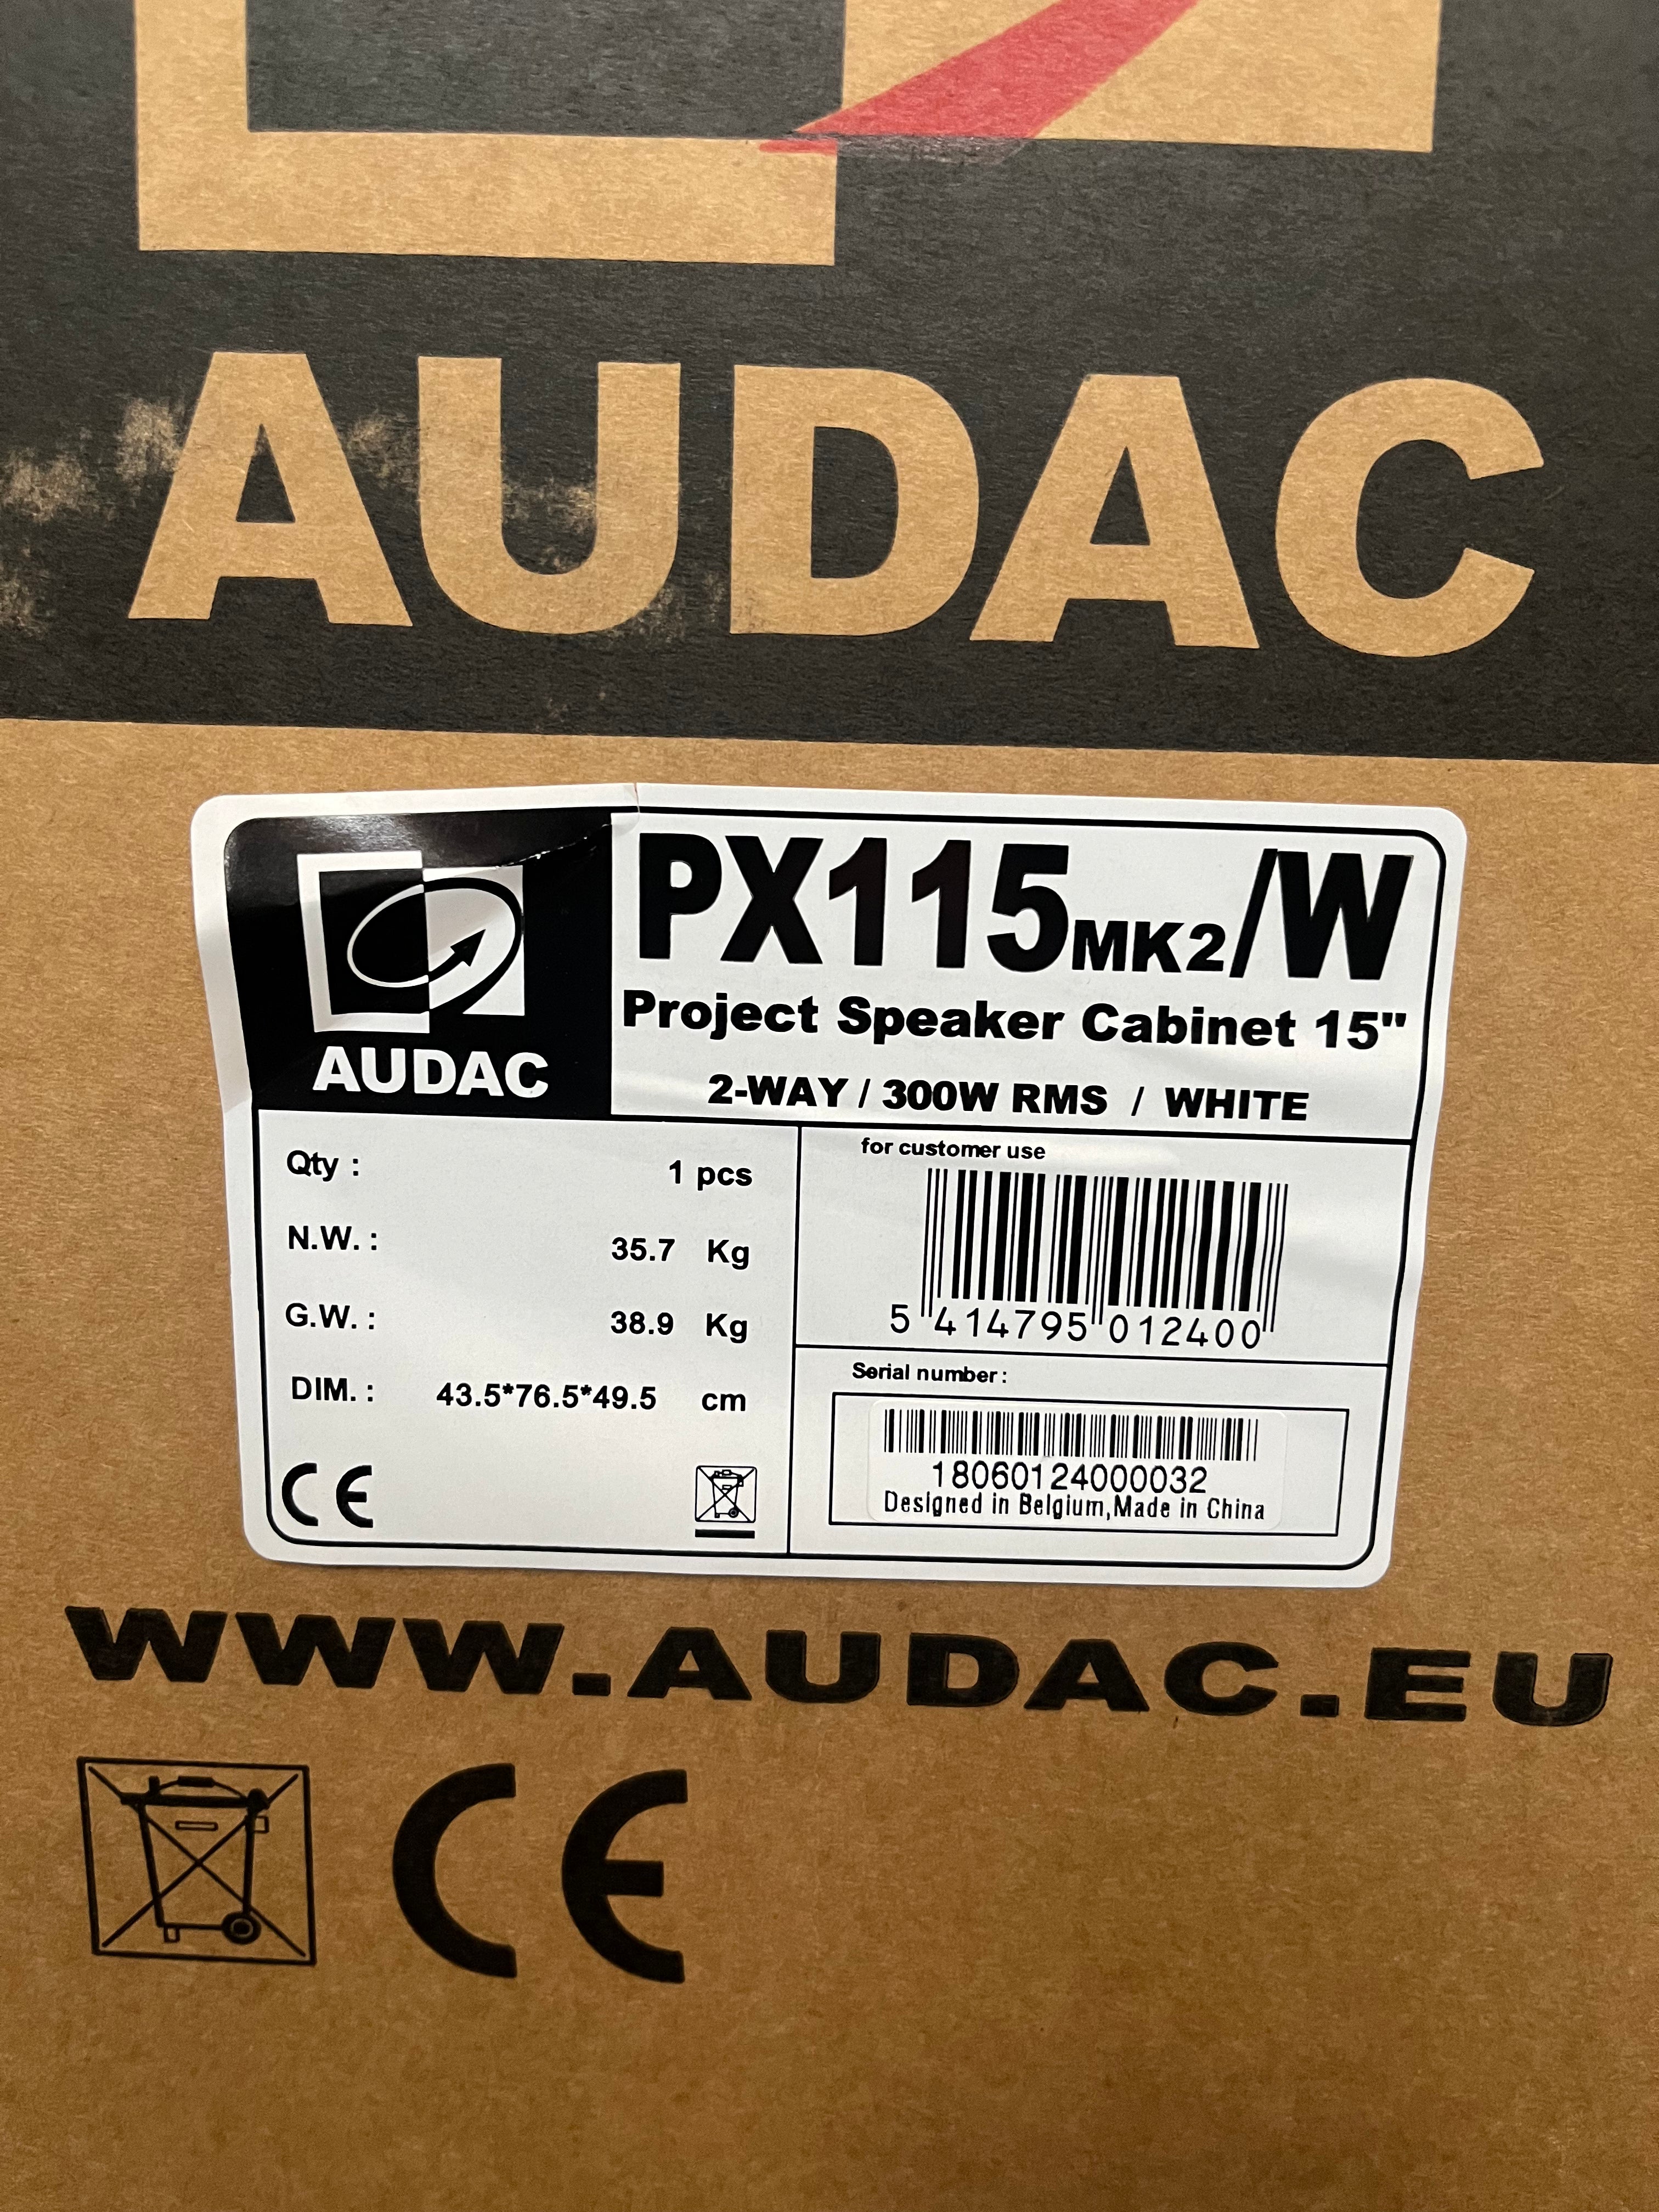 AUDAC PX115 Stock removal. Location Oulu.